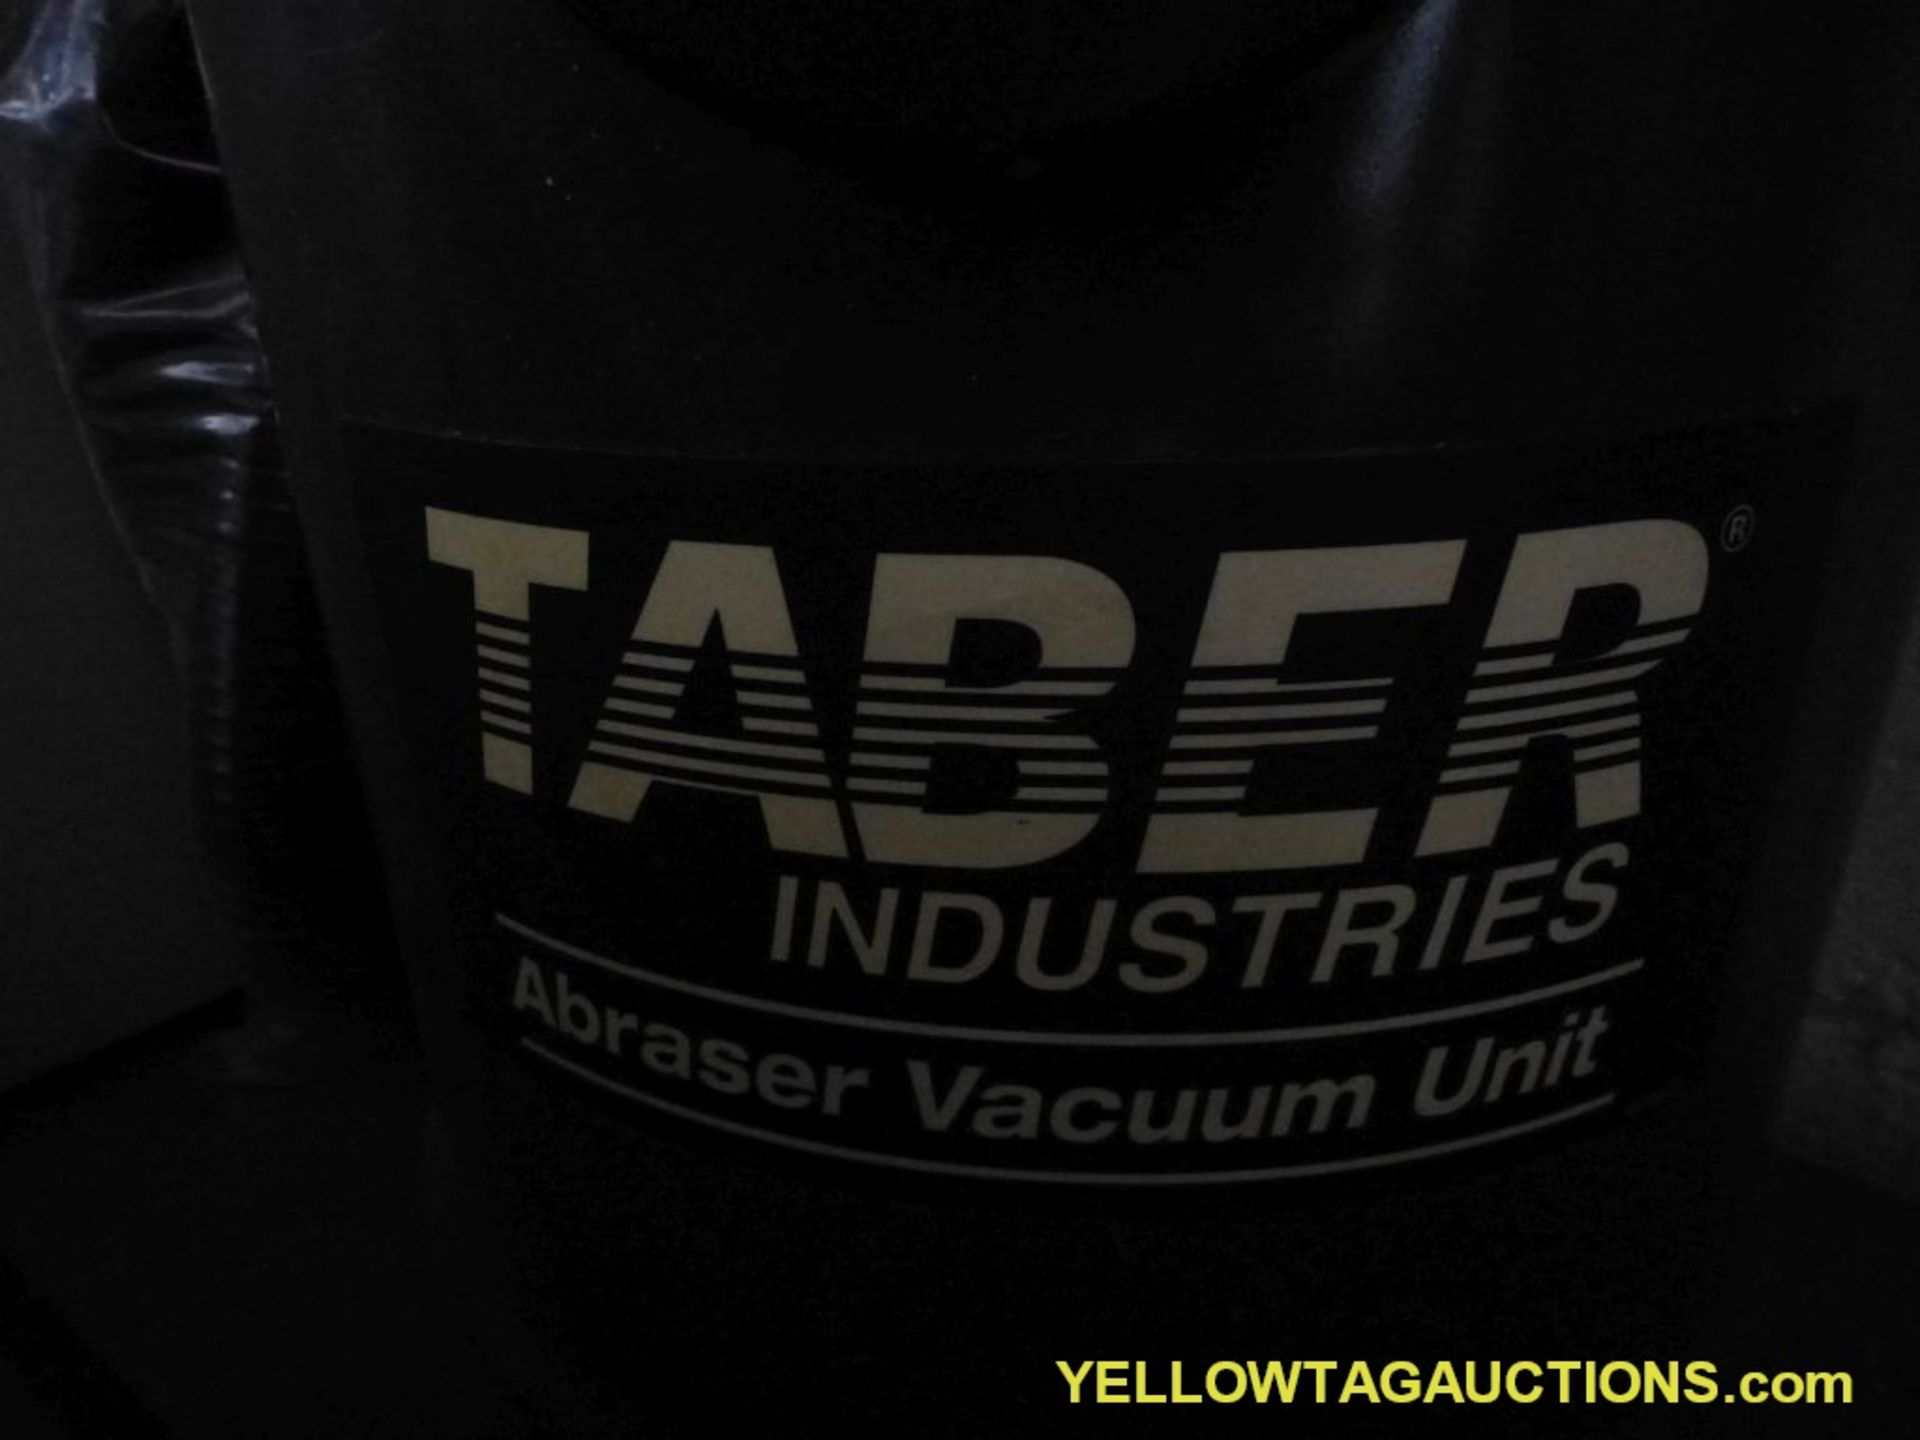 Taber Industries Abraser Vacuum Unit|Location: Charlotte, NC - Image 3 of 3